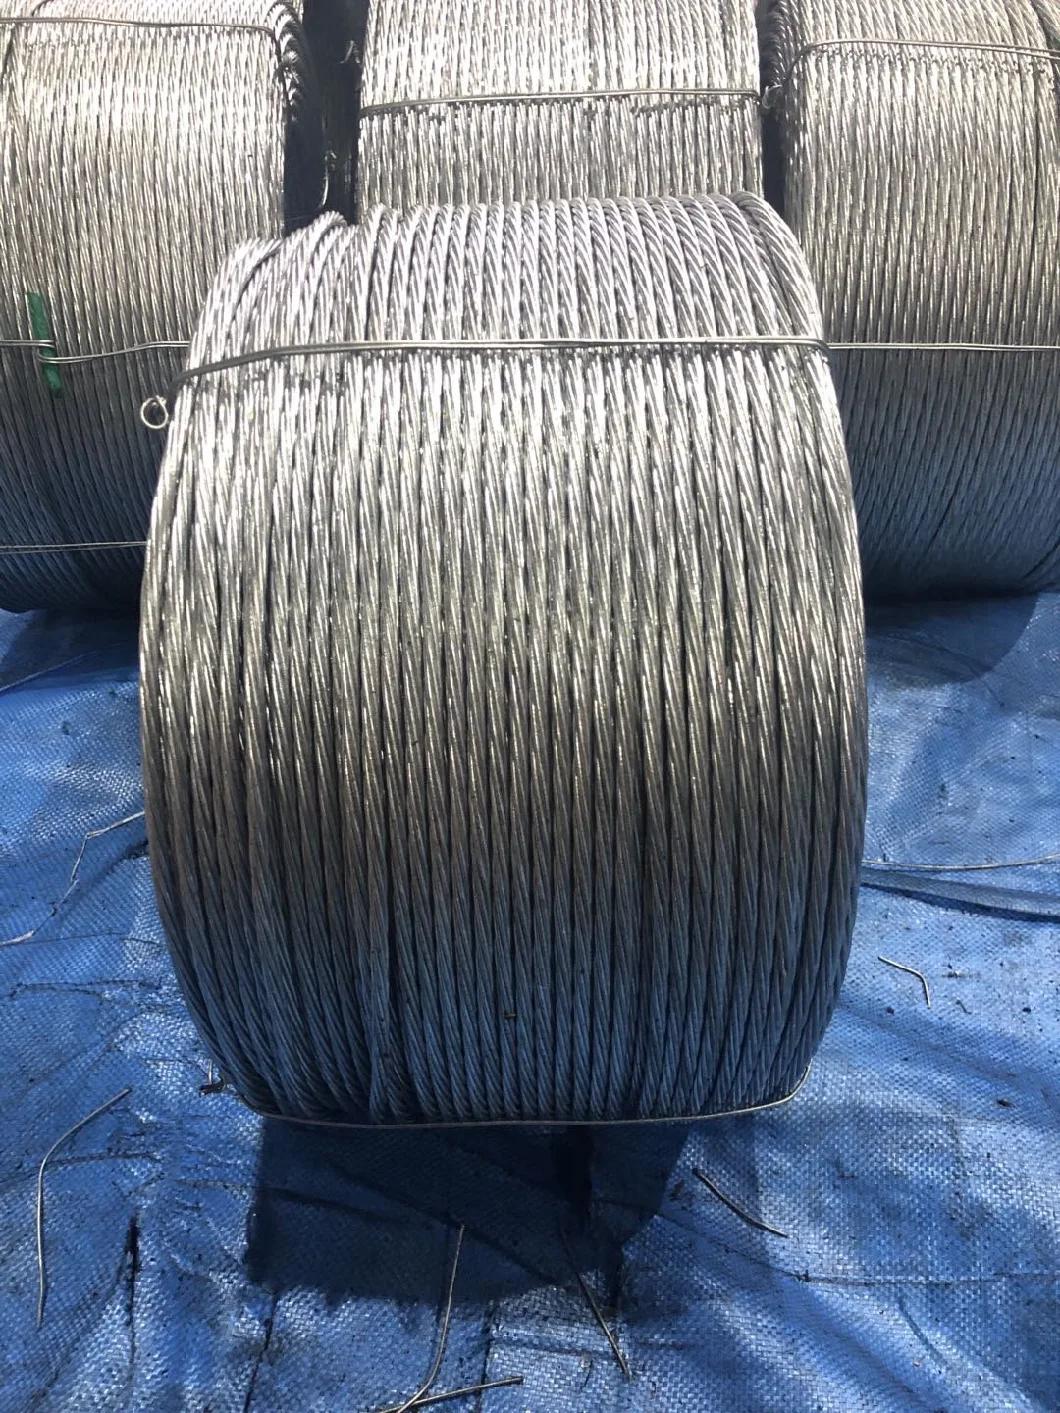 BS 183 Stay Wire Galvanized Steel Wire / Earth Wire 7/8 7/10